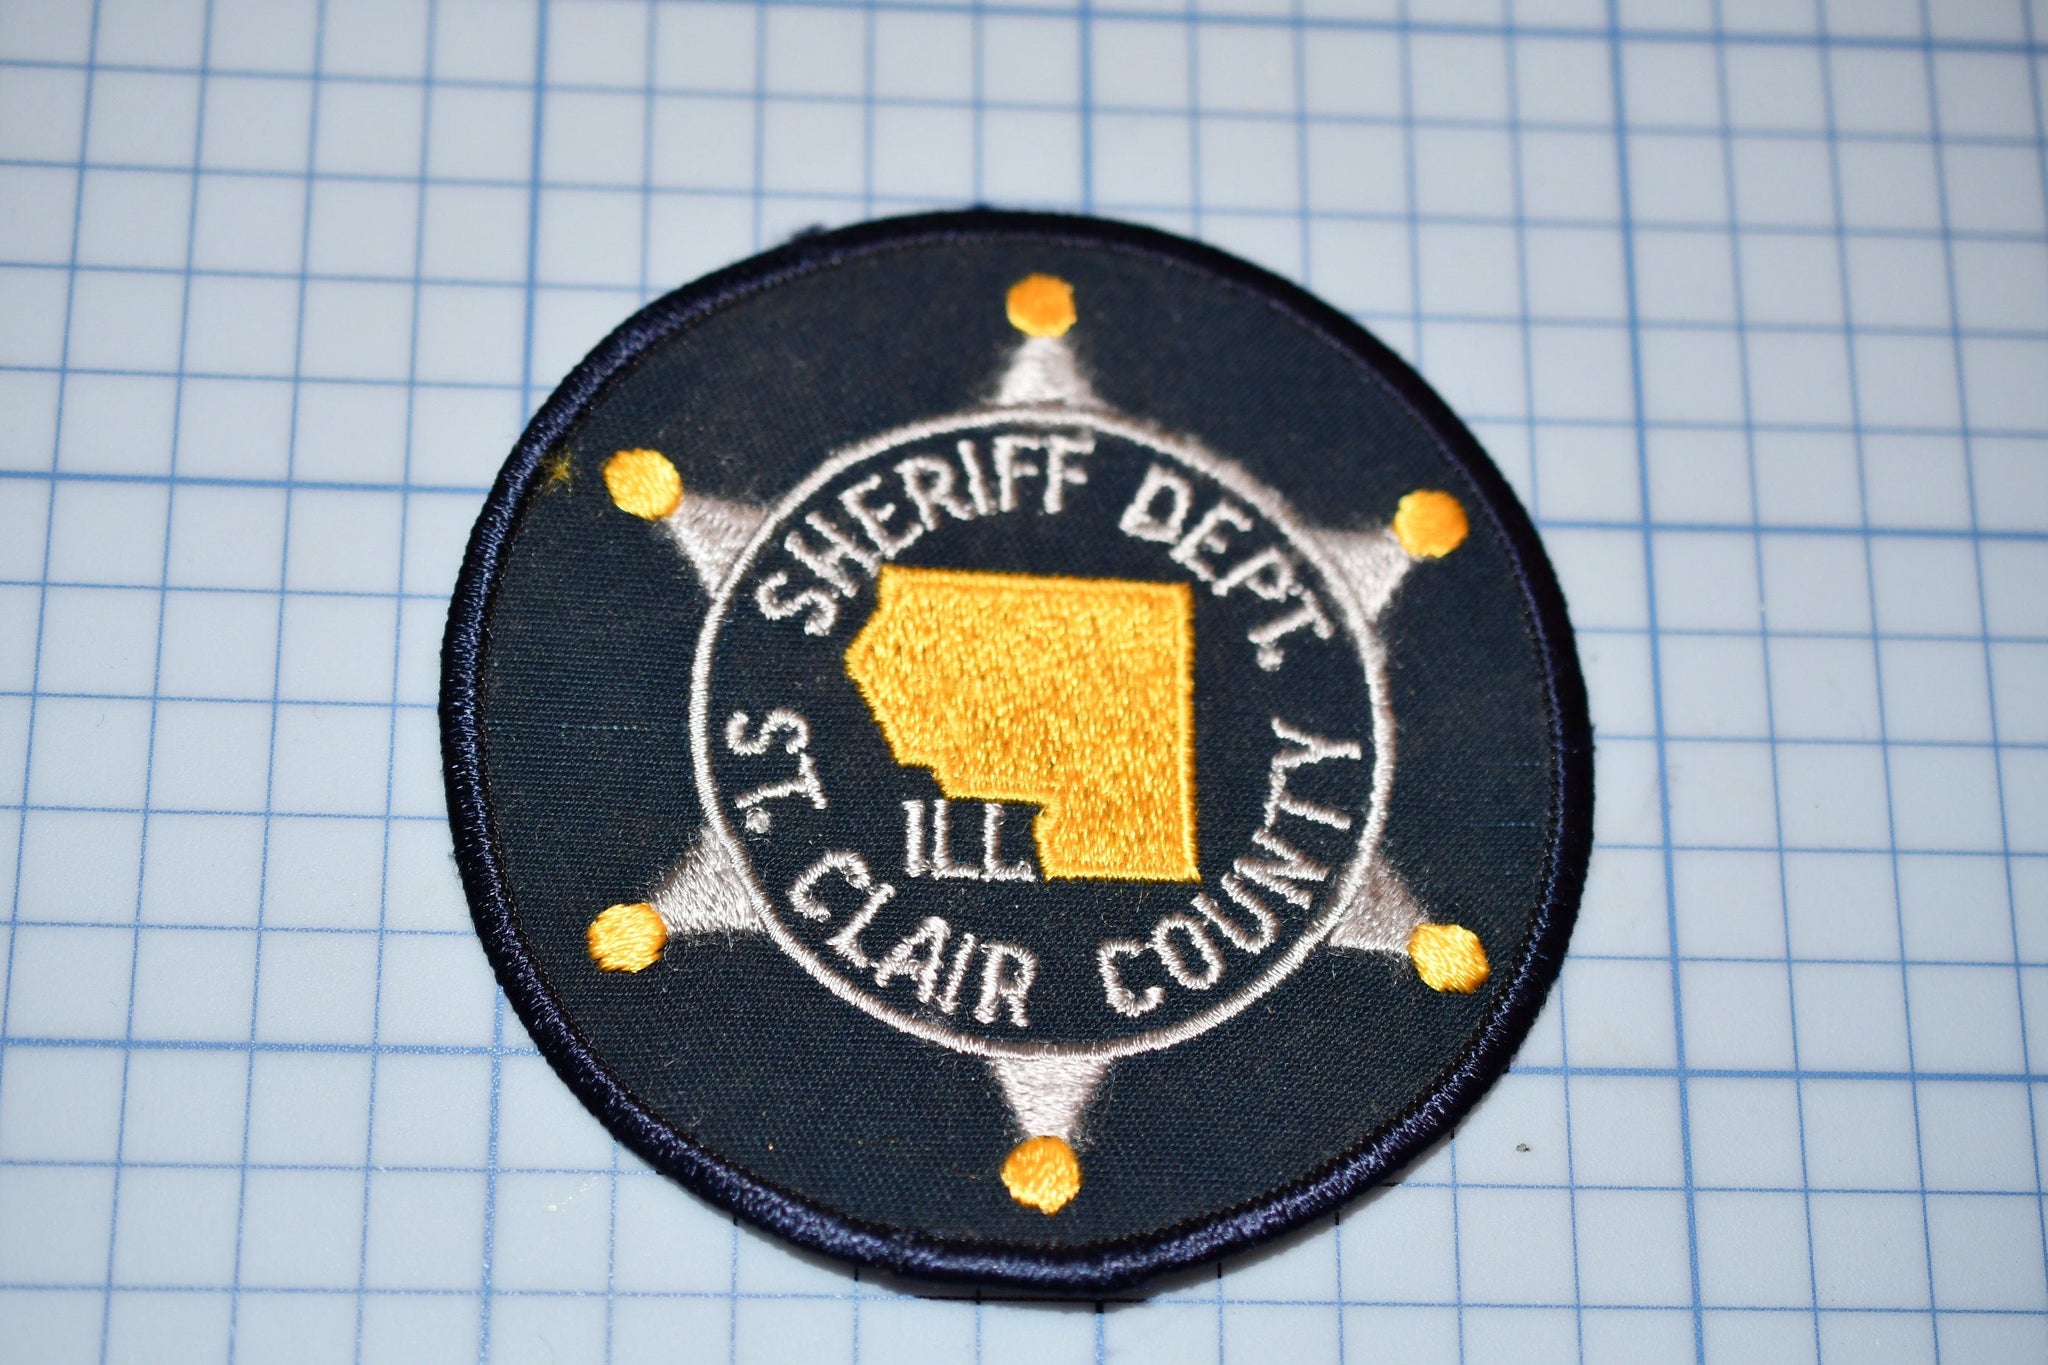 St. Clair County Illinois Sheriff Department Patch (S4-281)